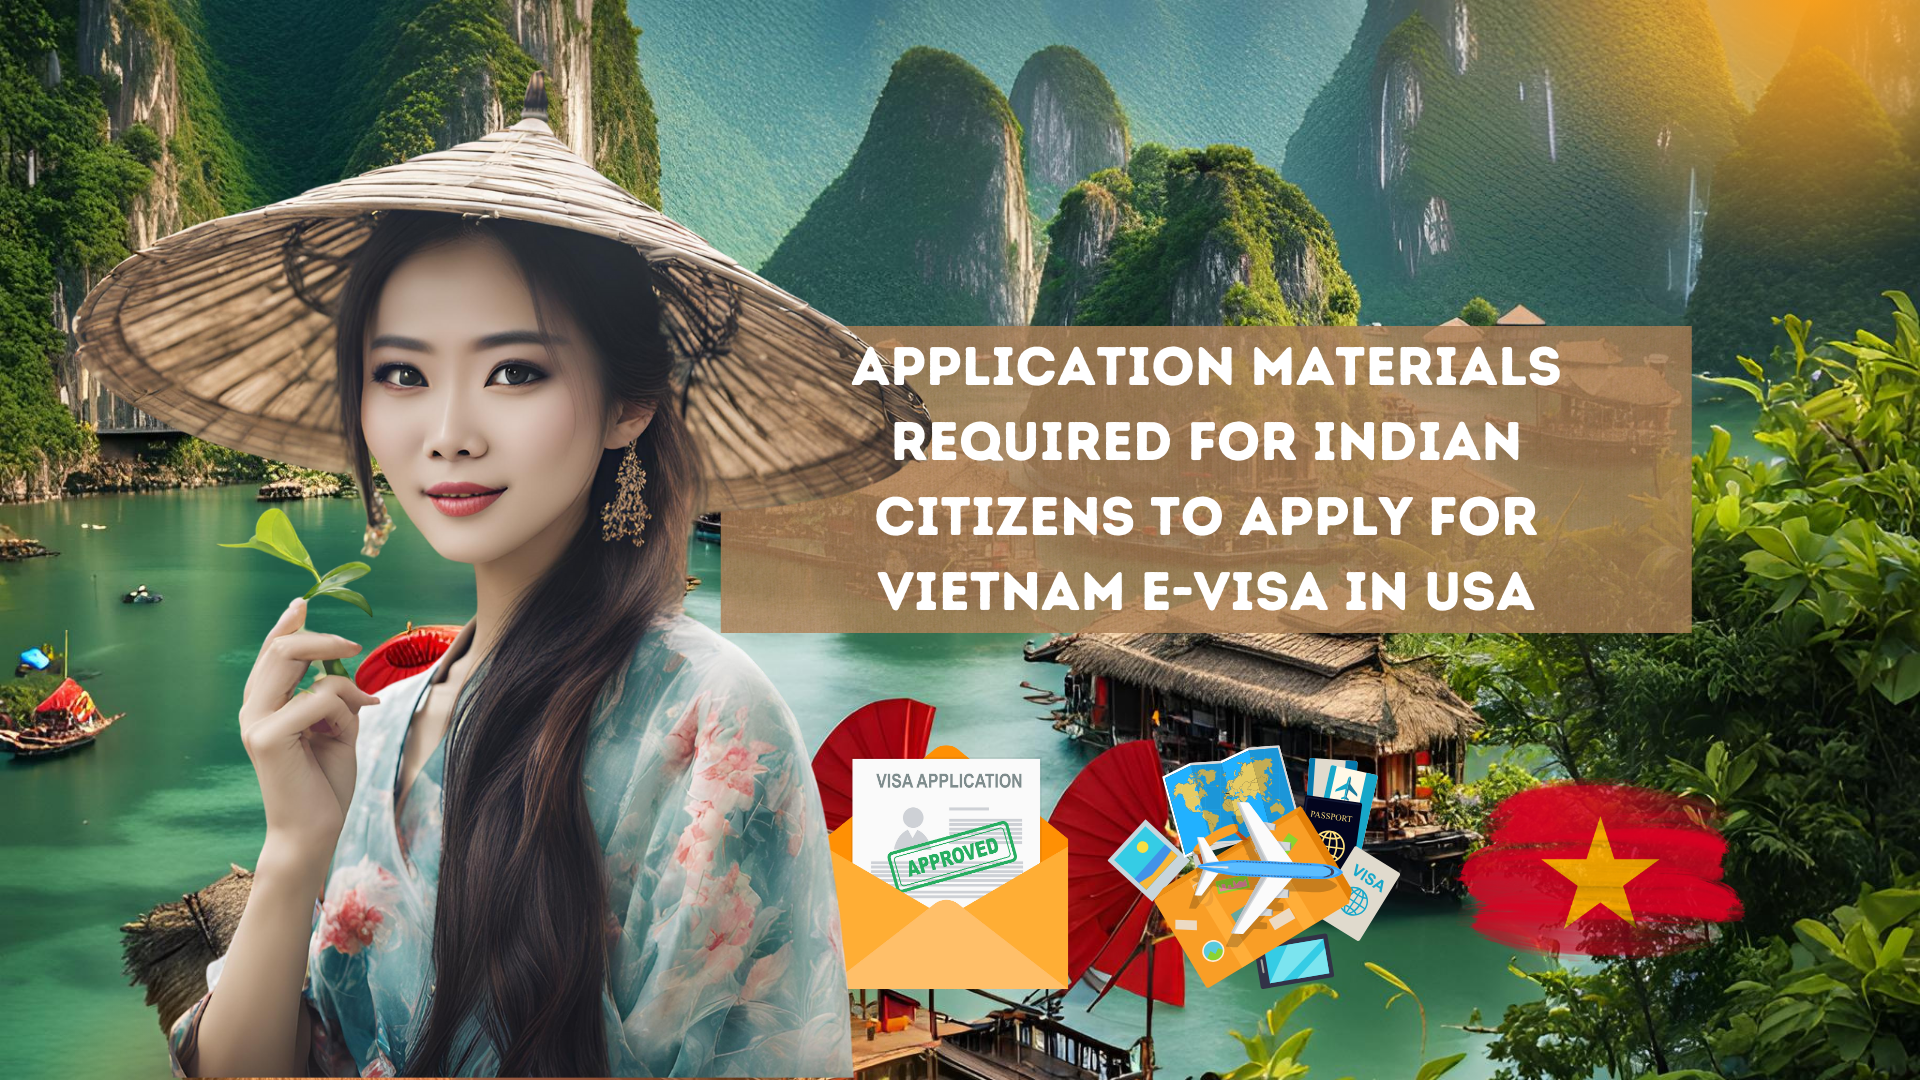 Application materials required for Indian citizens to apply for Vietnam e-visa in USA